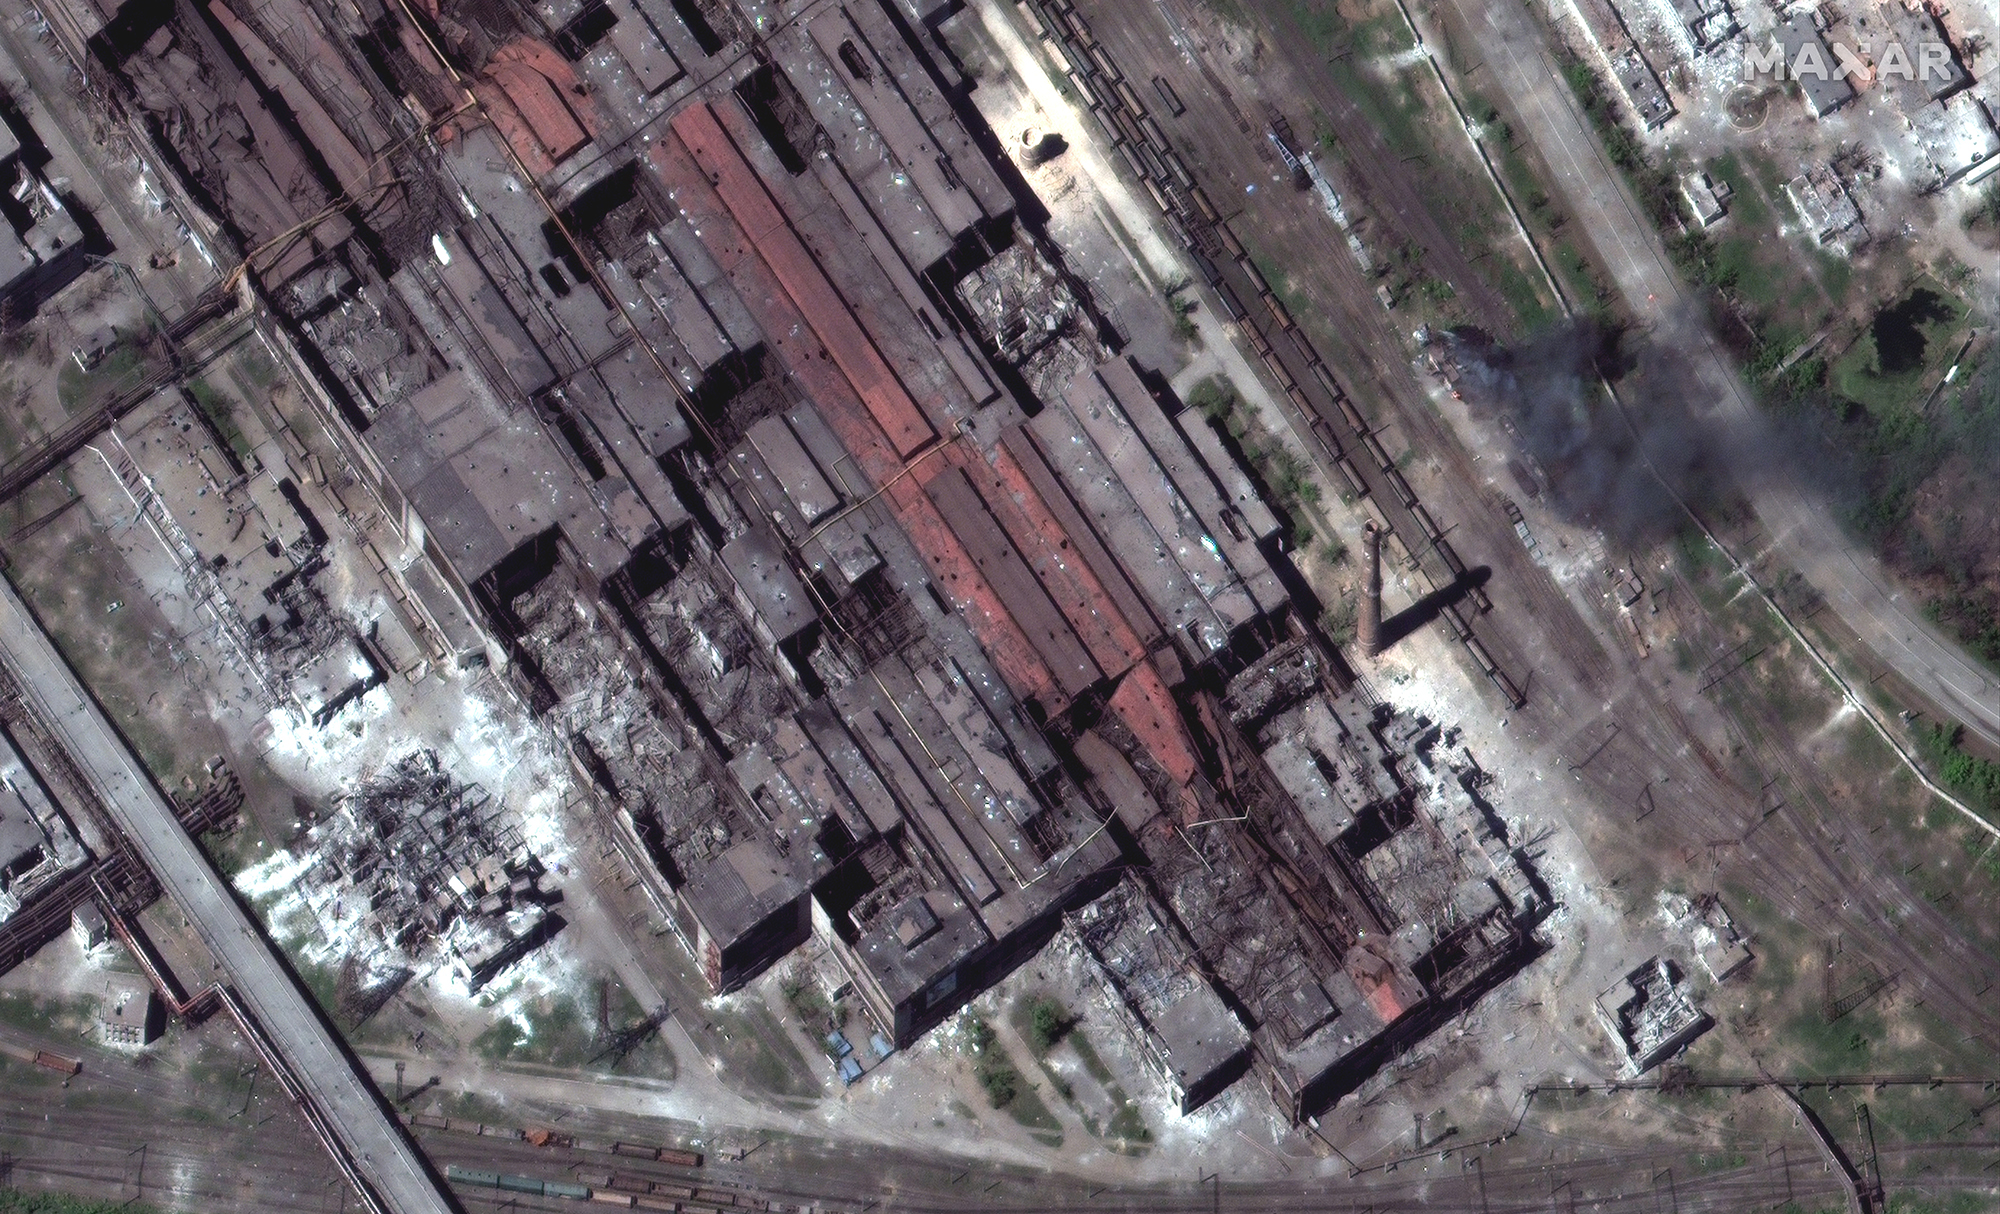 Satellite image of damage at the eastern end of the Azovstal steel plant in Mariupol, Ukraine, May 12.